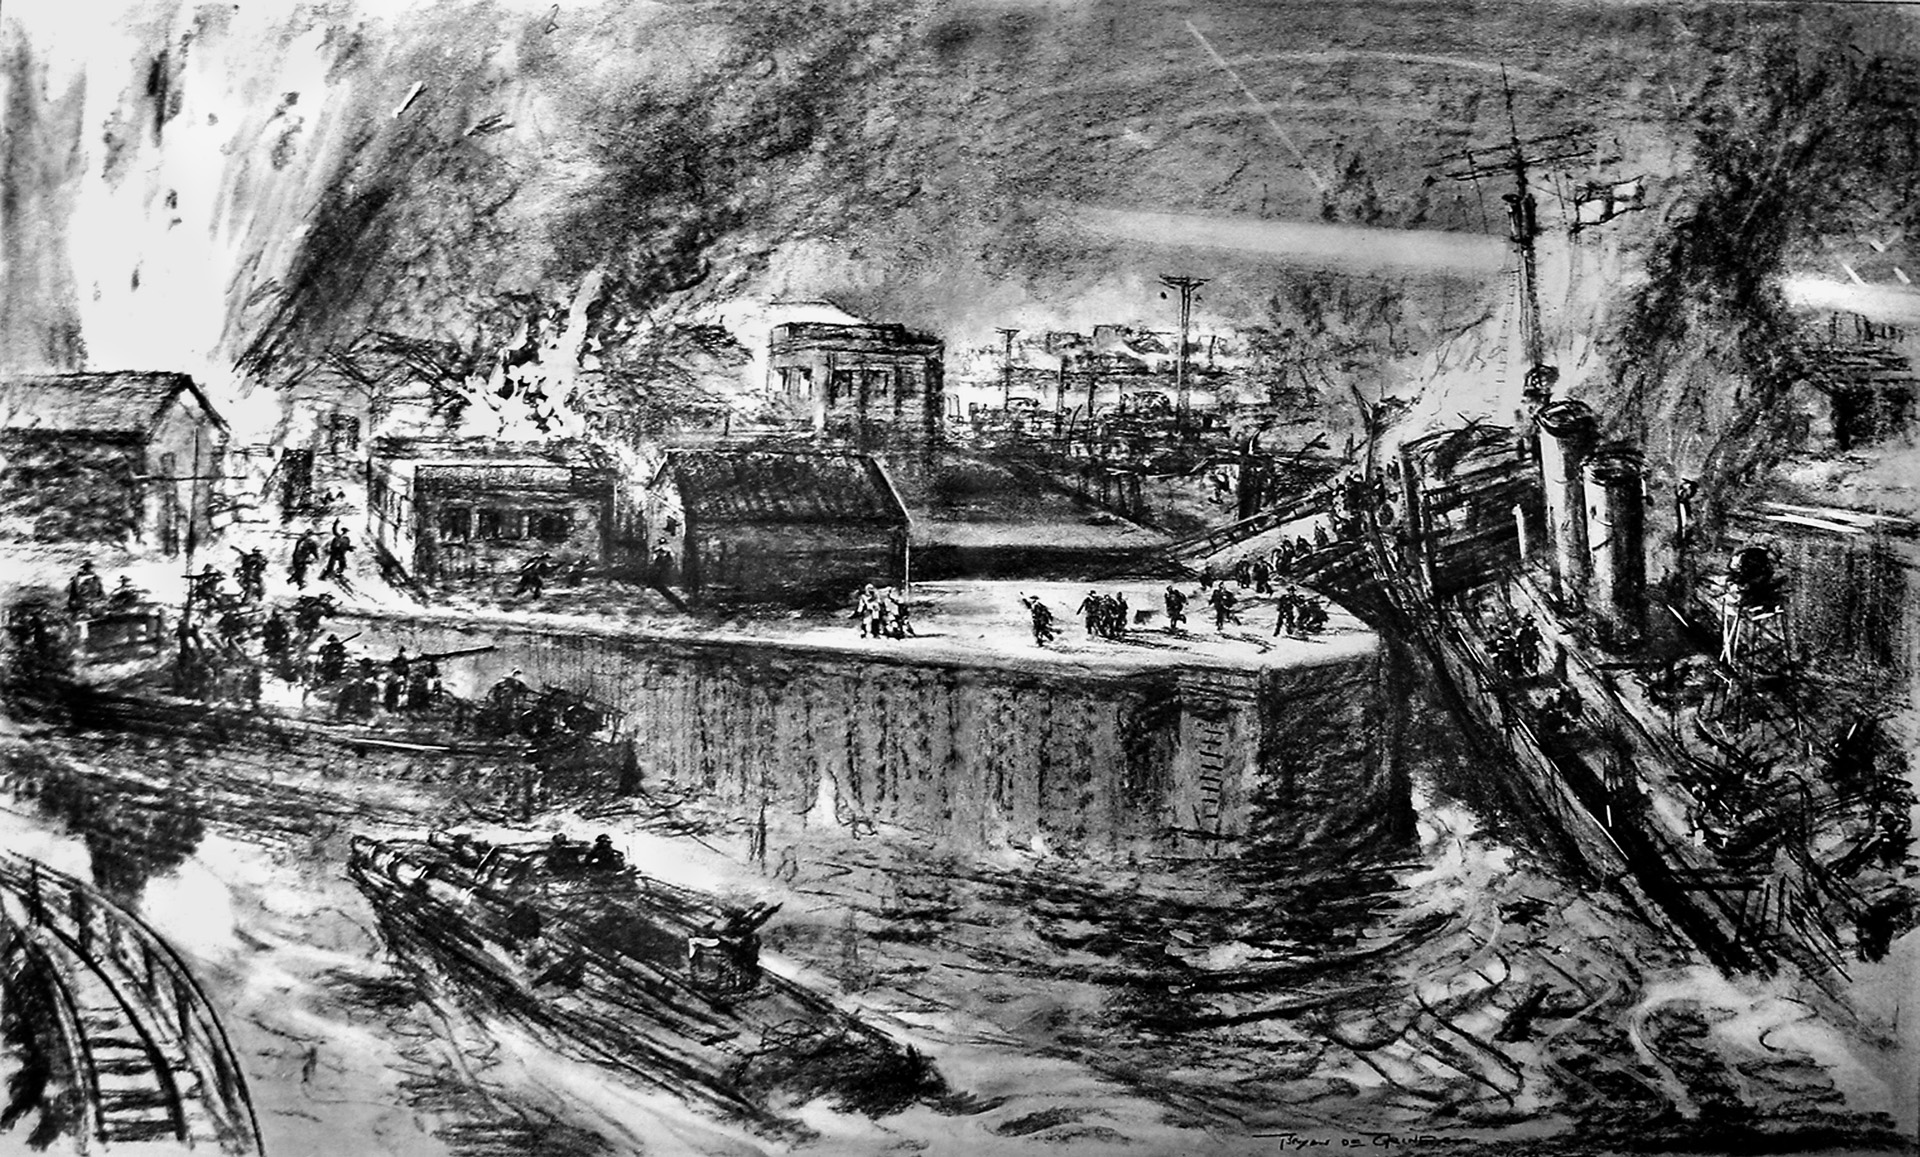 Sketch of the St. Nazaire raid; HMS Campbeltown (right) has just rammed the Normandie lock gate, and Commandos are sprinting off the ship to attack German installations.